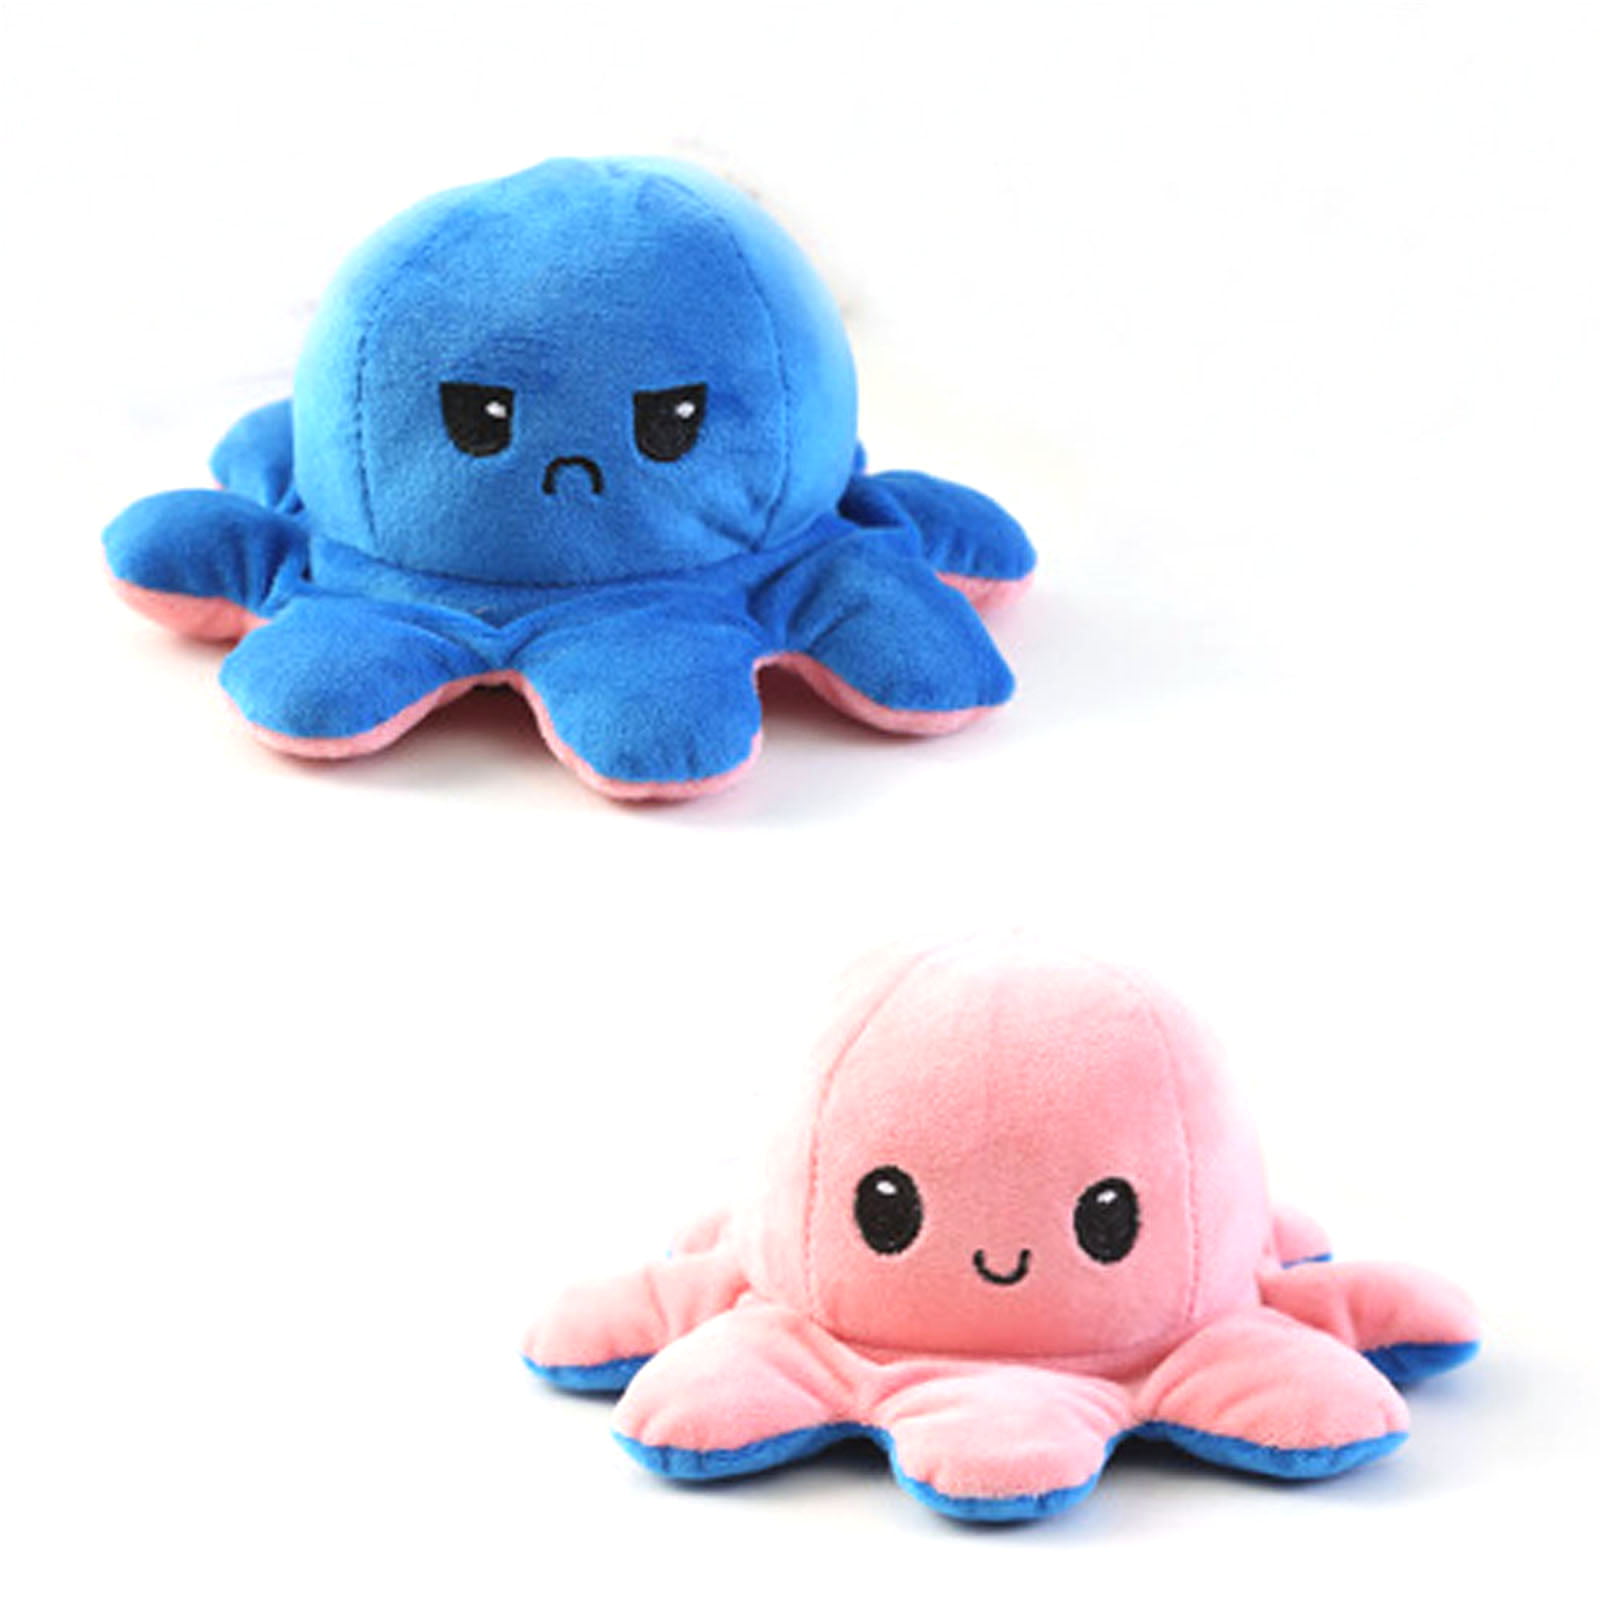 Cute Double-Sided Flip Octopus Soft Reversible Octopus Plush Toys Doll Stuffed Animals Doll Creative Toy Gifts for Kids Friends Girls Boys Beige-Yellow